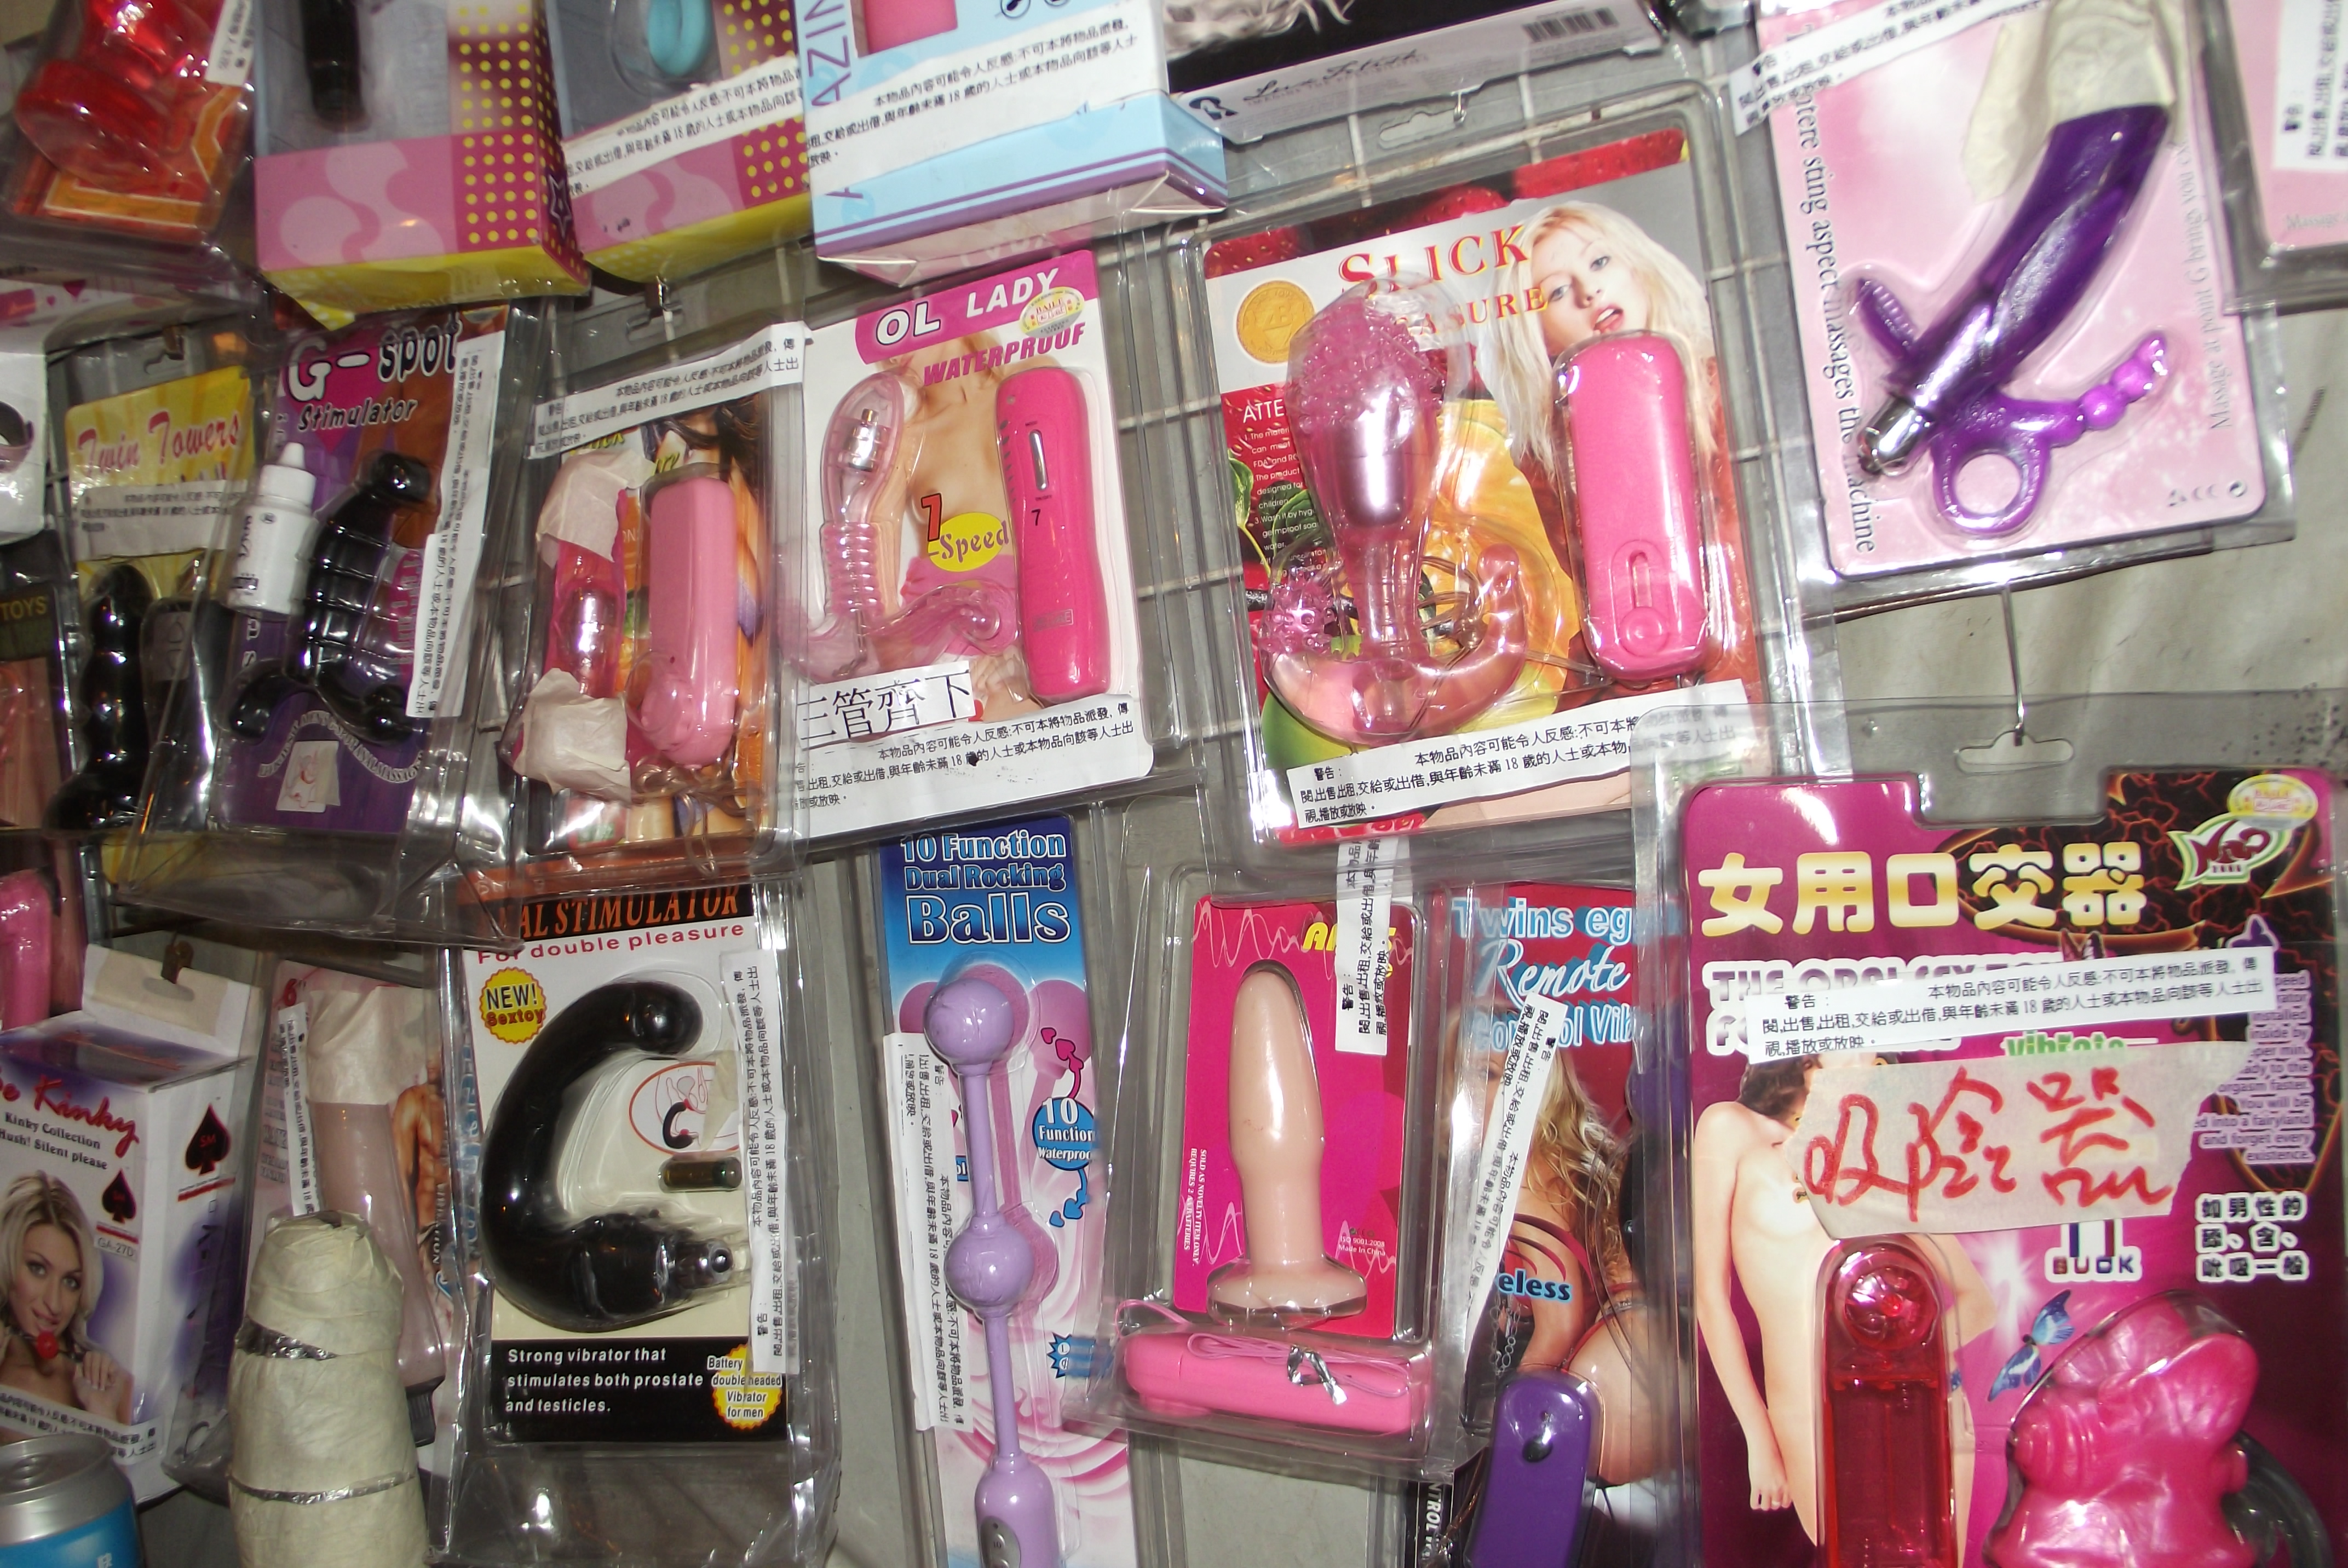 Food Cart That Also Offers Sex Toys Shut Down For Some Reason Consumerist